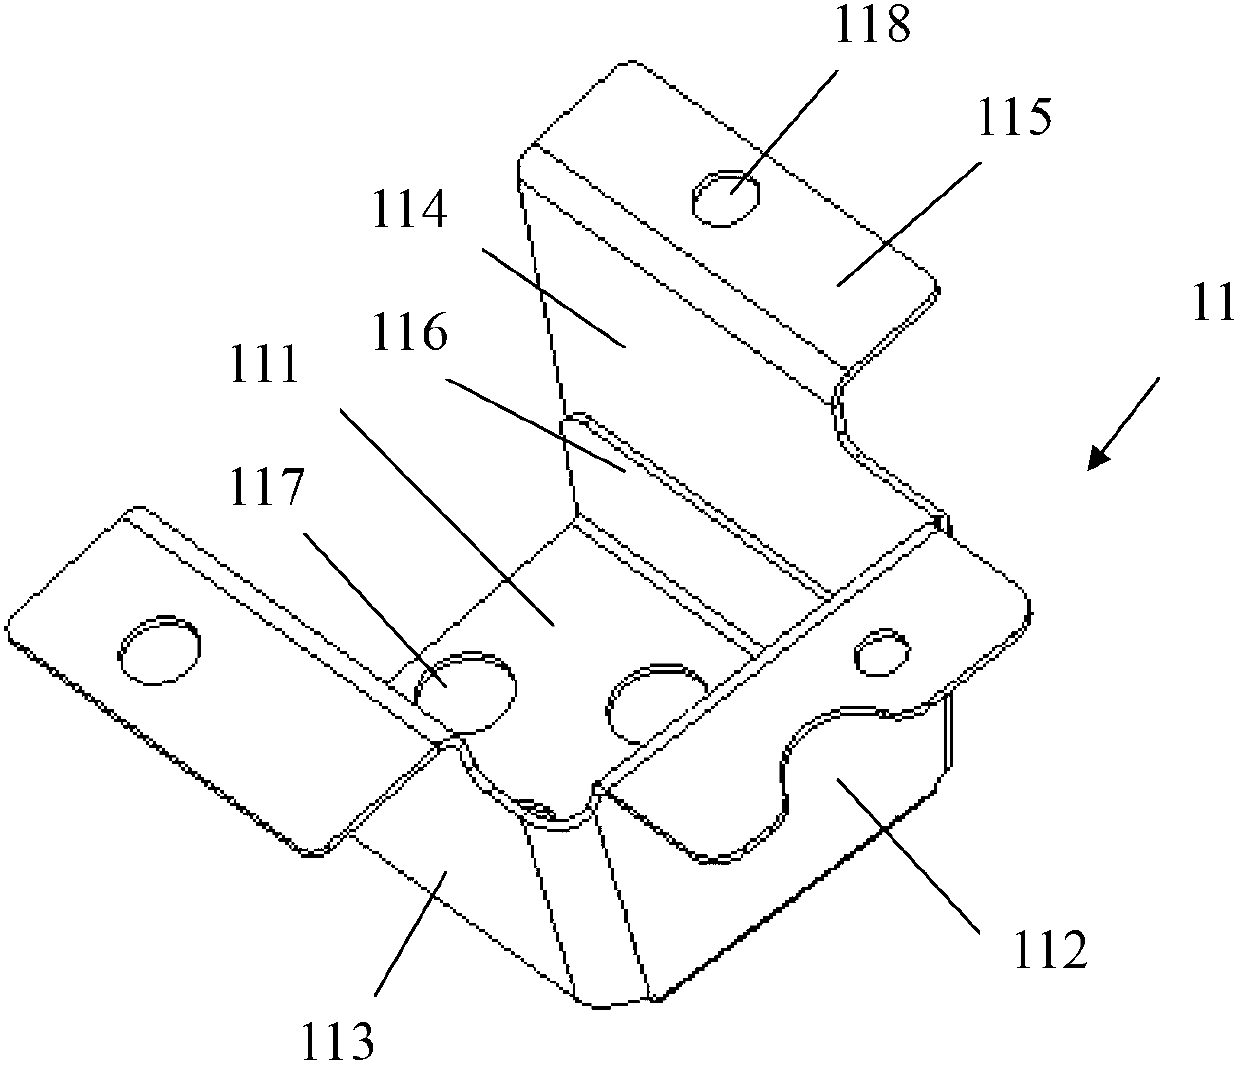 Tail door hinge mounting structure